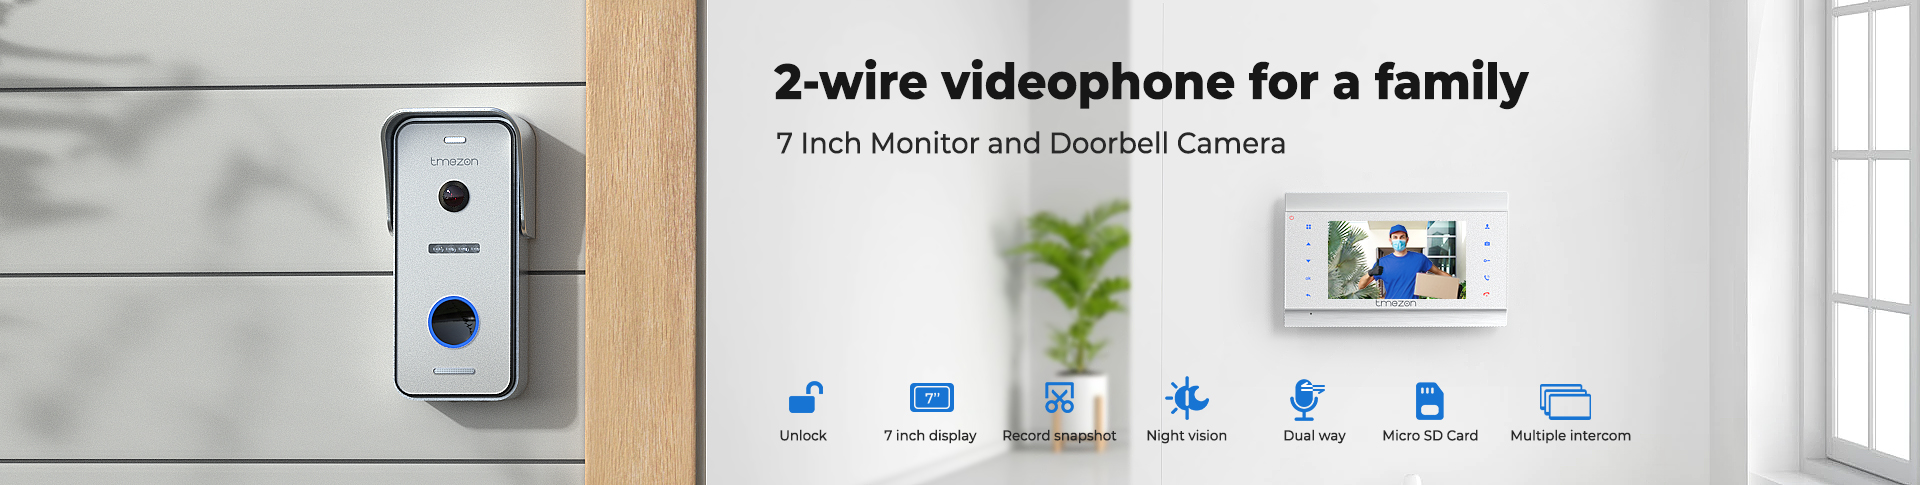 2-wire videophone for a family